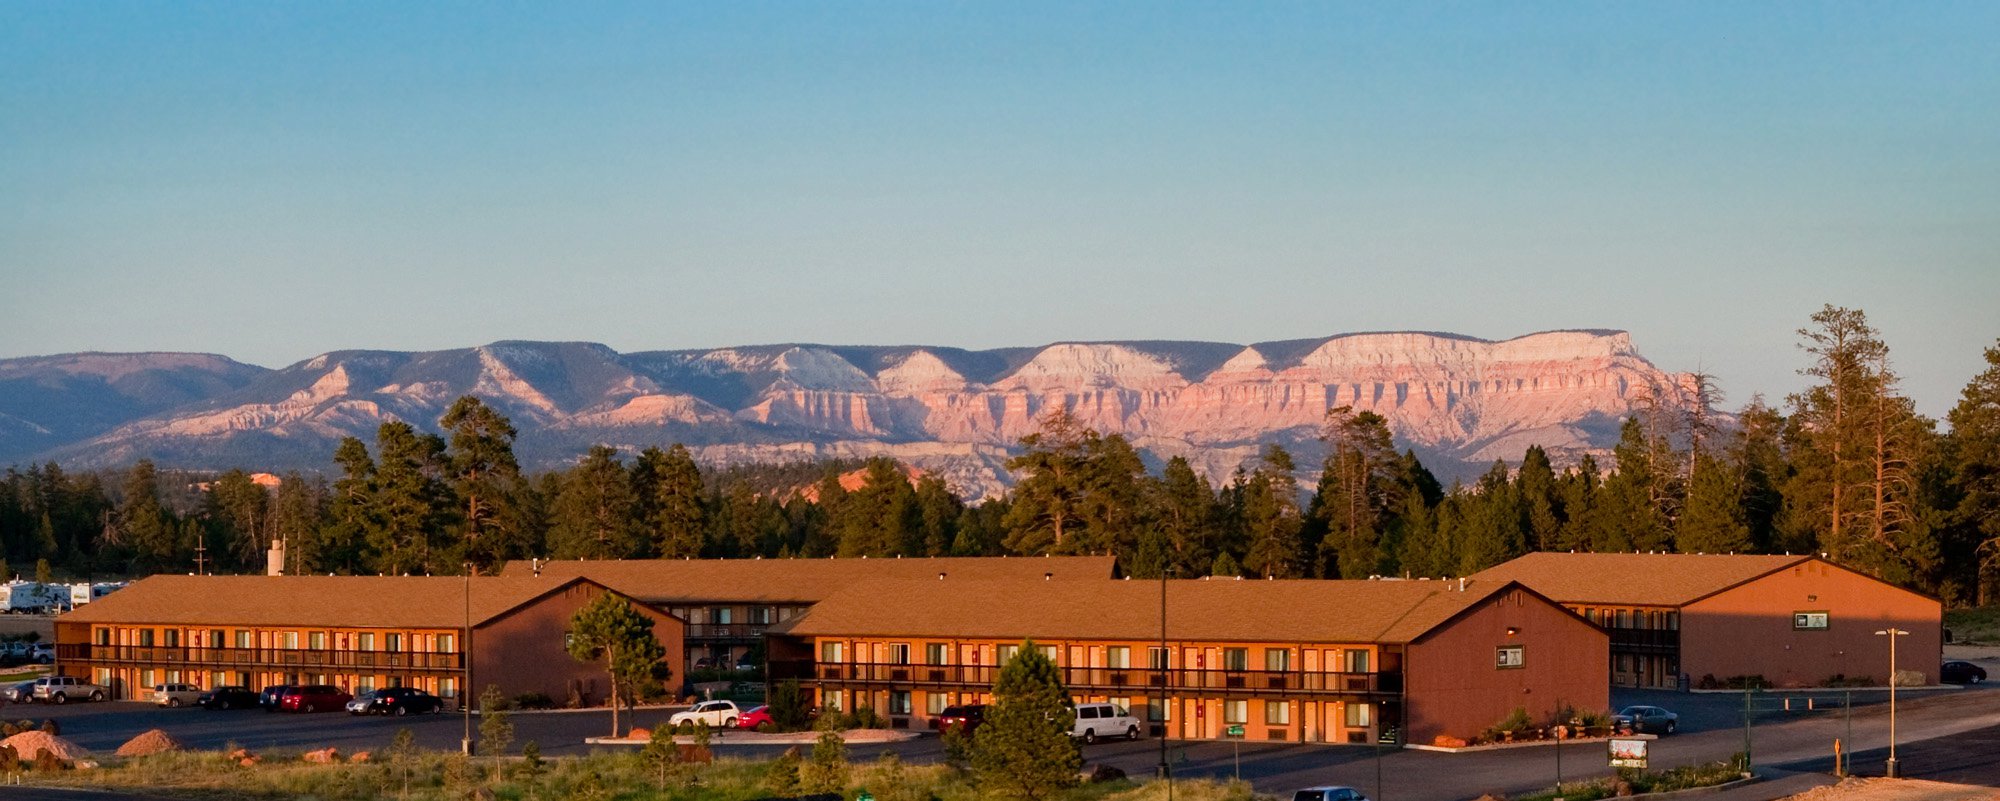 Bryce View Lodge | lodging | 105 Center St, Bryce Canyon City, UT 84764, United States | 4358345180 OR +61 435-834-5180